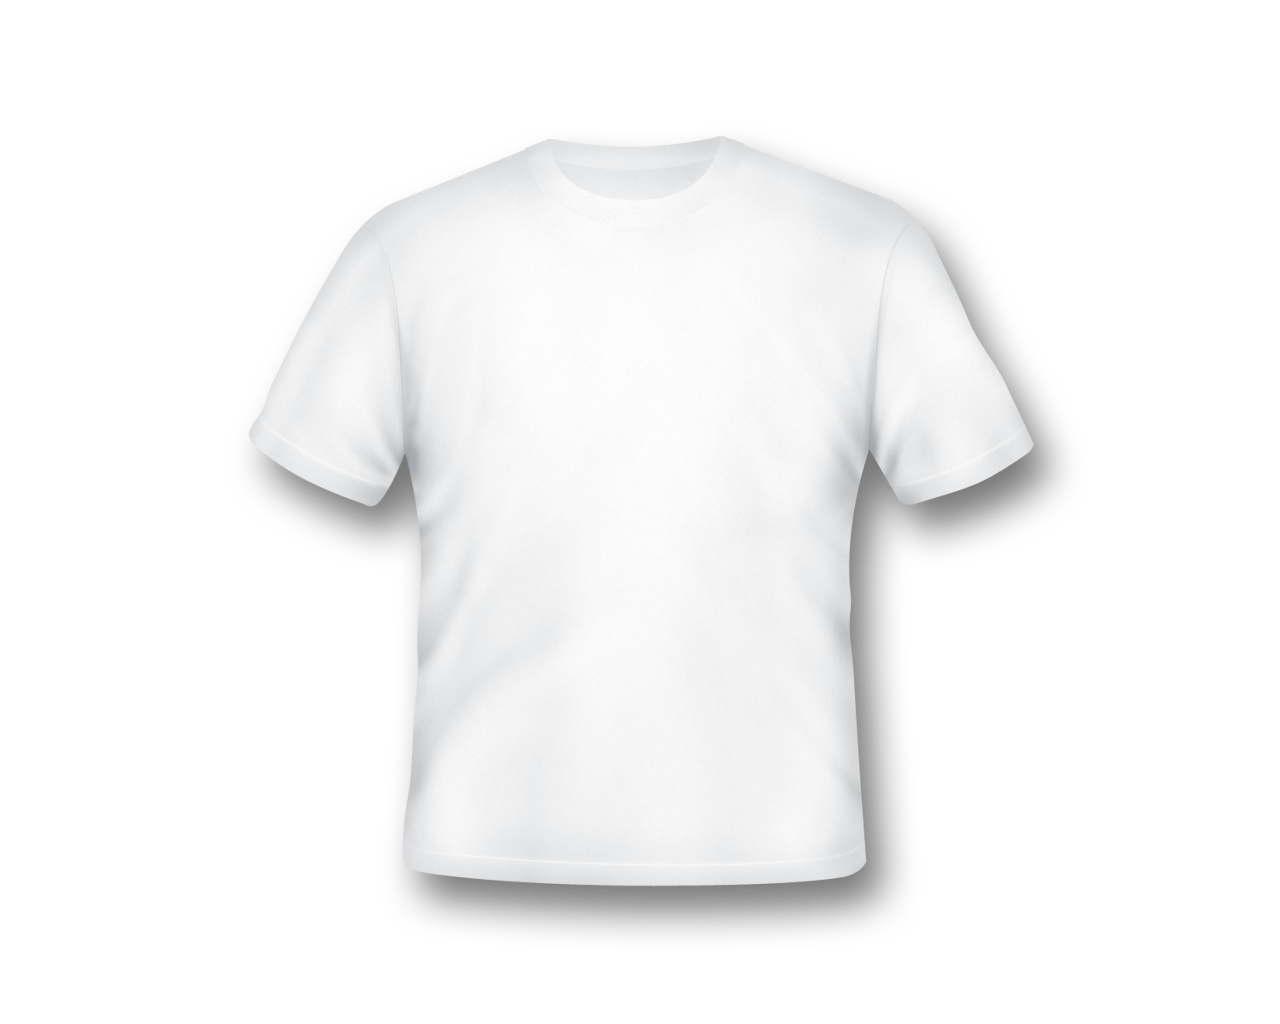 Shirt Clipart Pent Shirt Shirt Pent Shirt Transparent Free For Download On Webstockreview 2020 - blank roblox shirt template transparent 2020